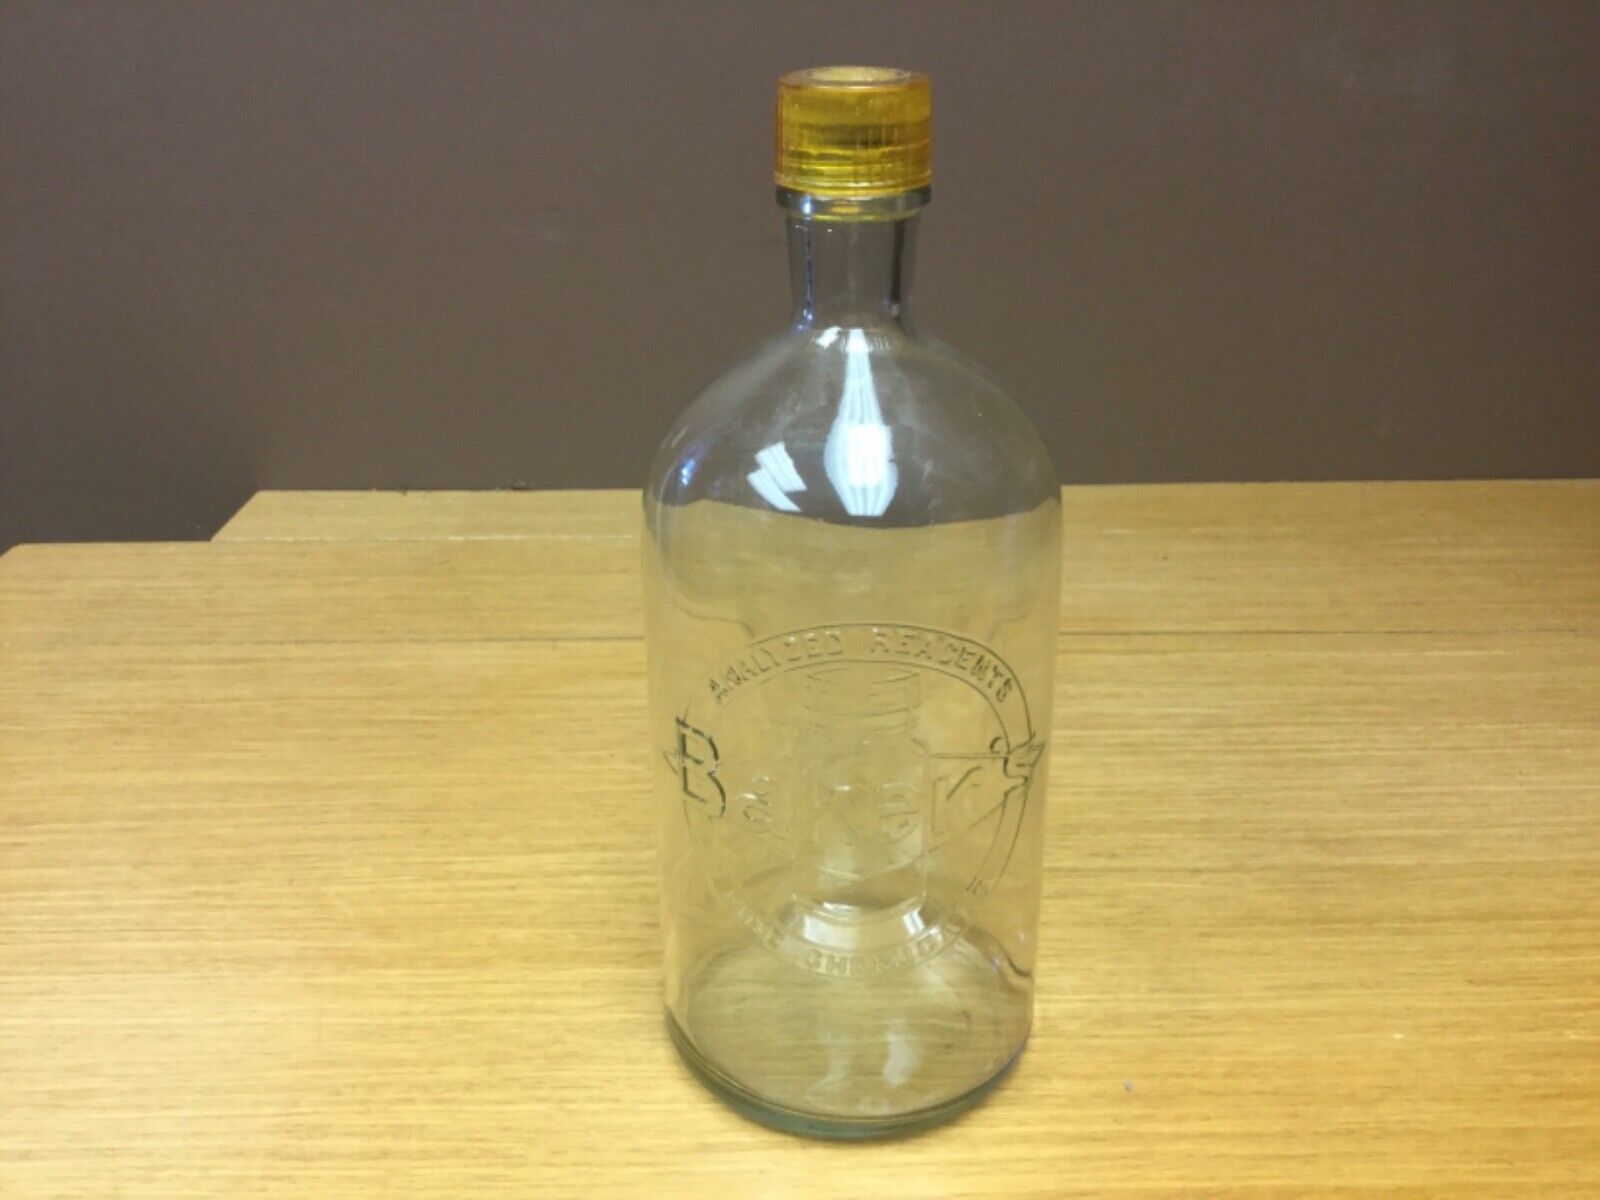 Atq. Bakers Analyzed Reagents Fine Chemicals Gallon Glass Bottle YellowCap (JER)